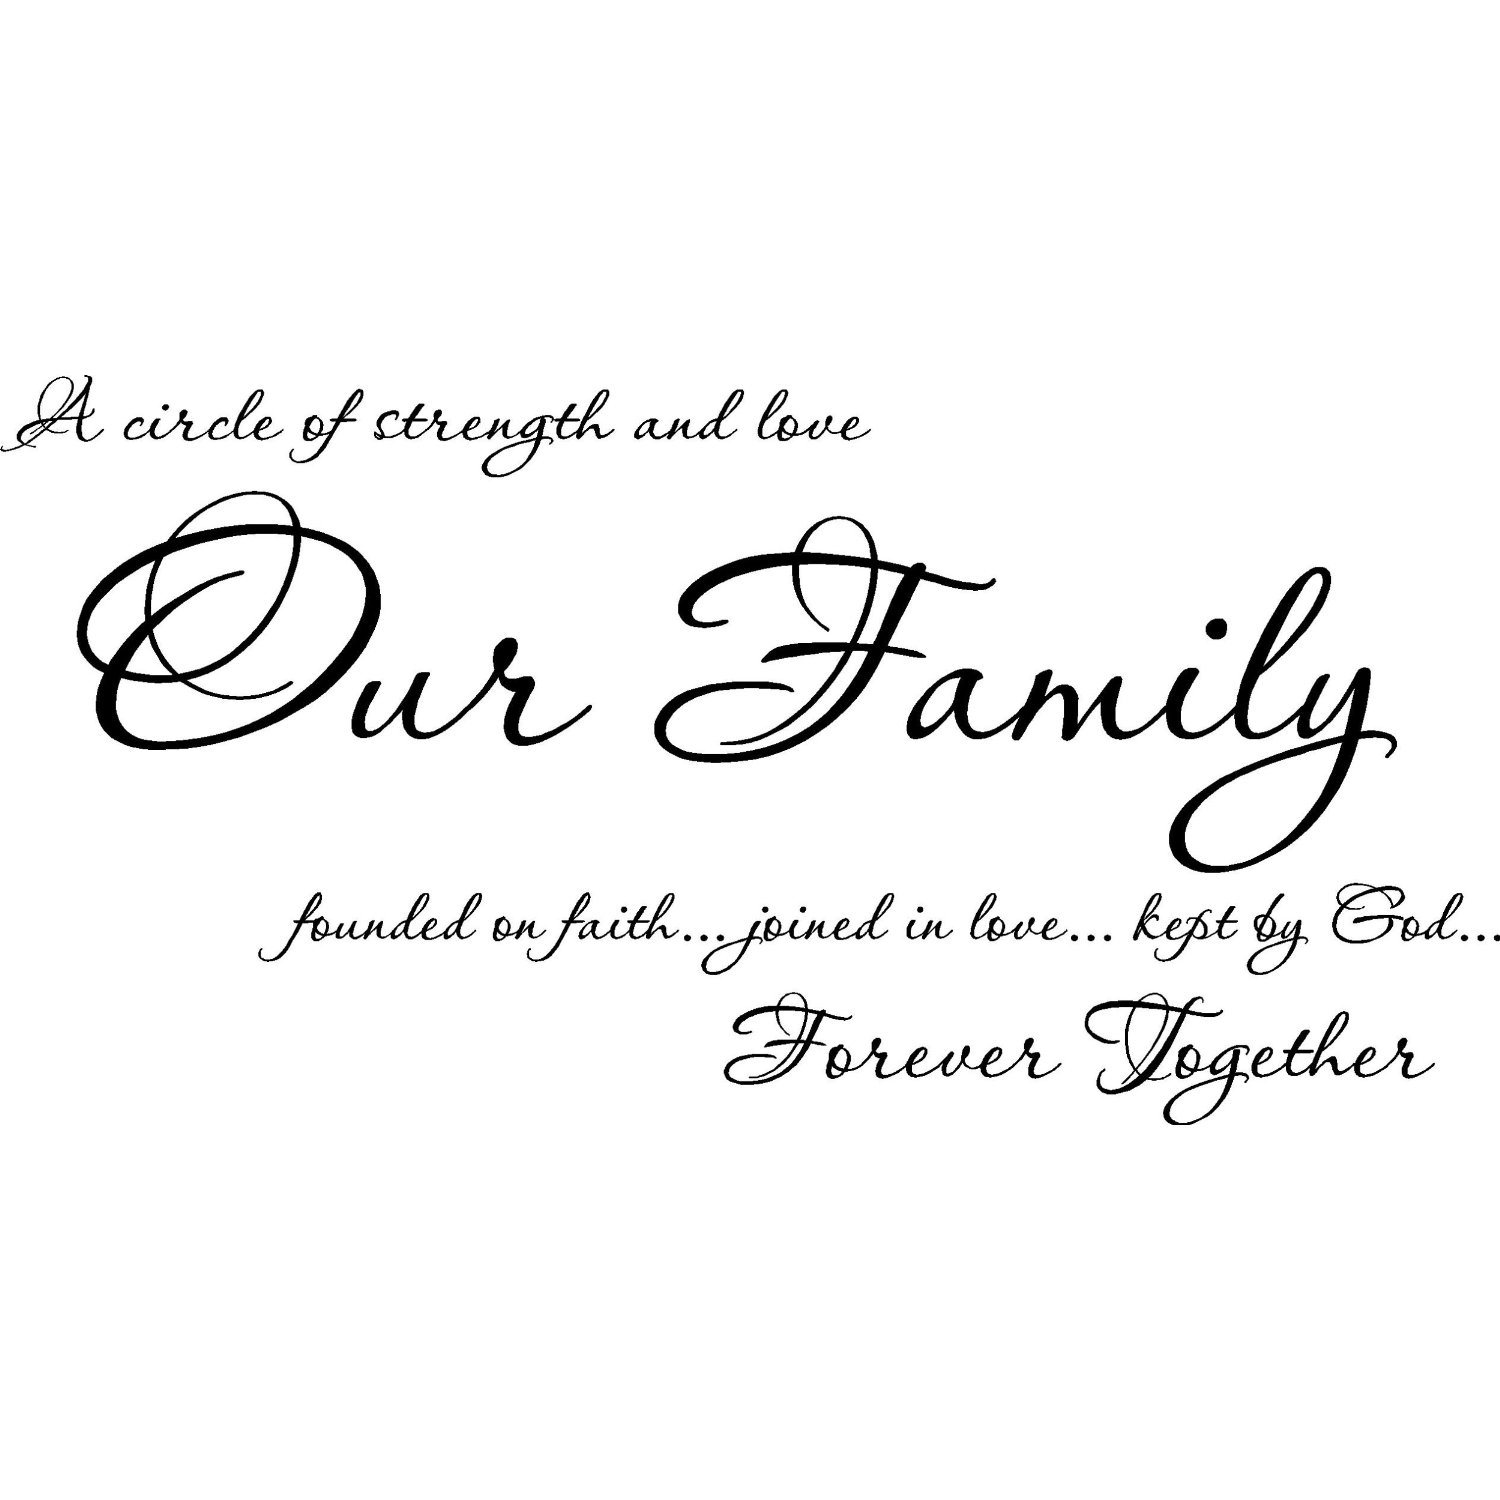 My family quotes